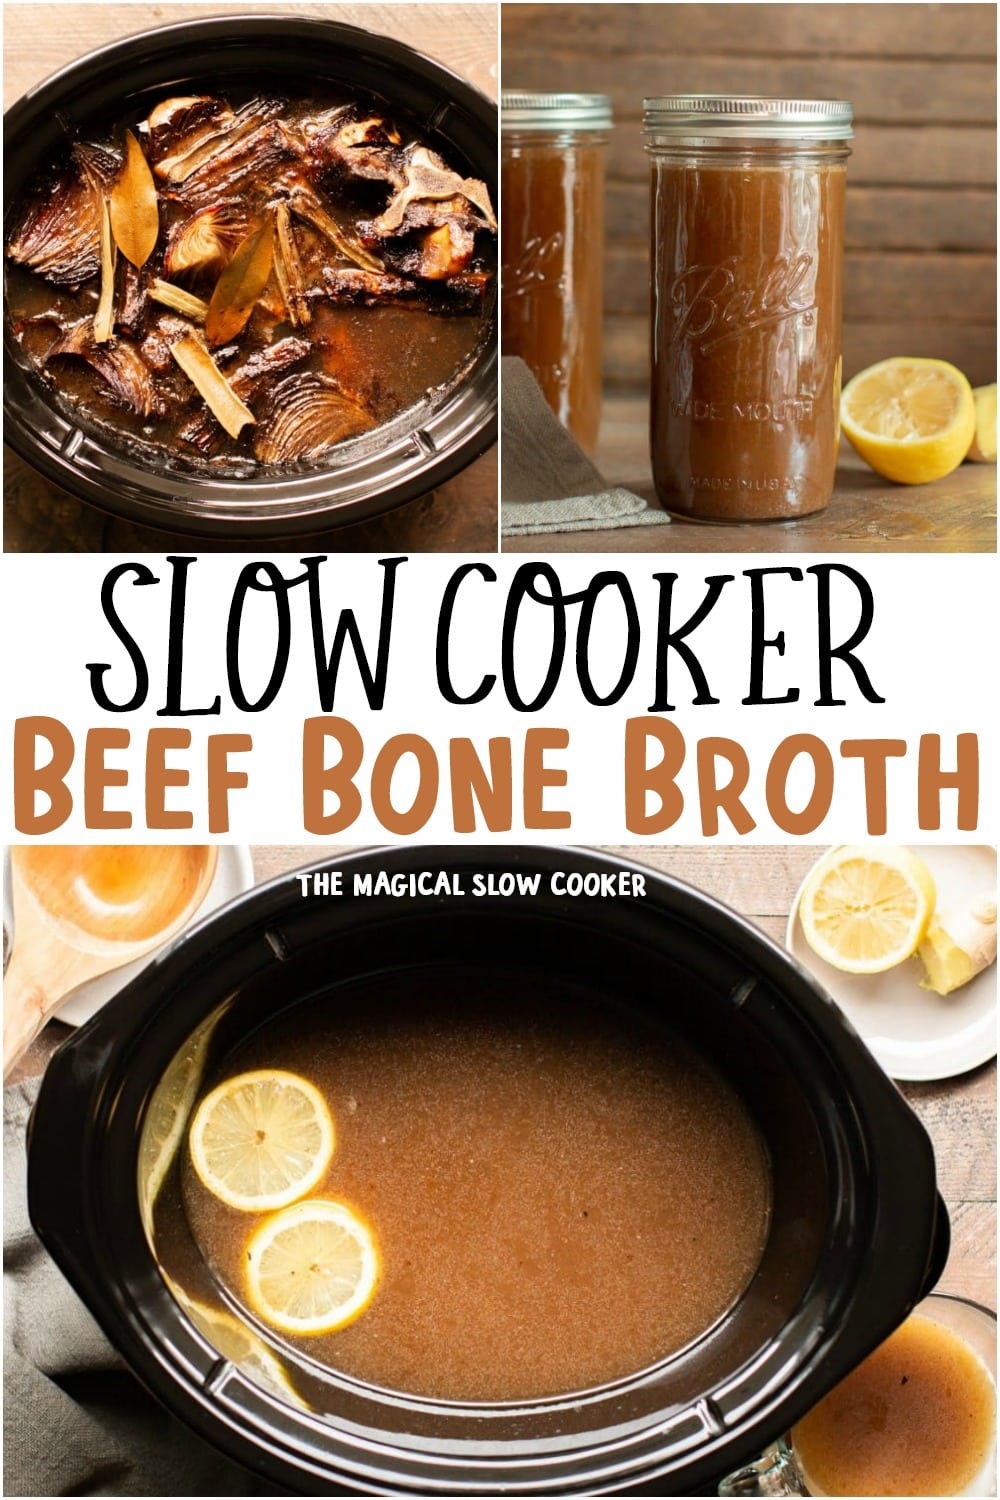 Slow Cooker Beef Bone Broth - The Magical Slow Cooker